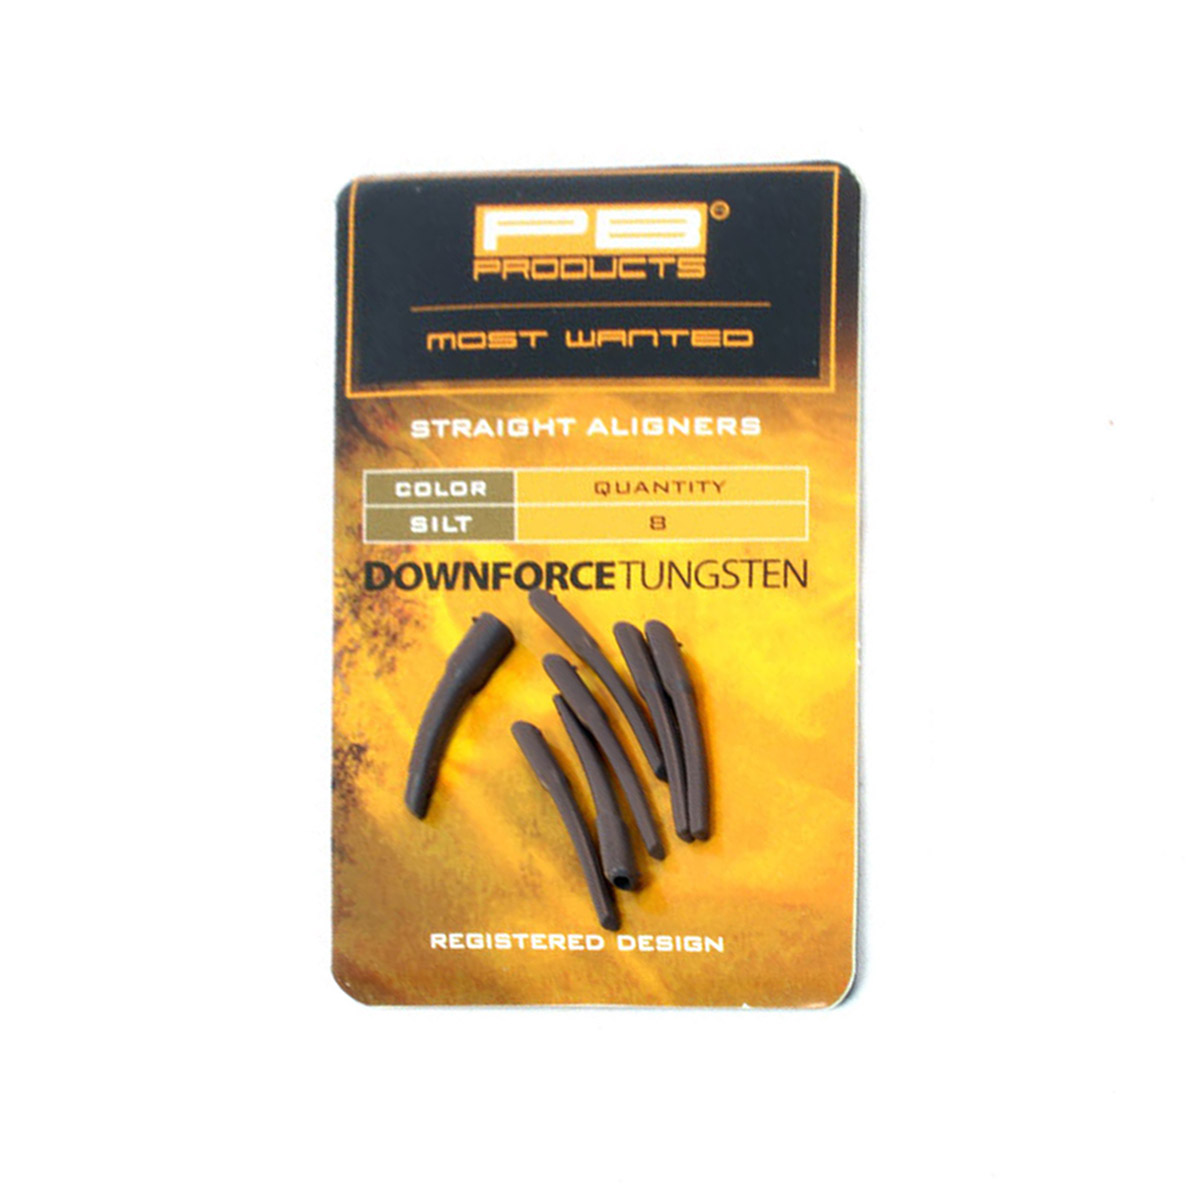 PB Products Downforce Tungsten Straight Aligners